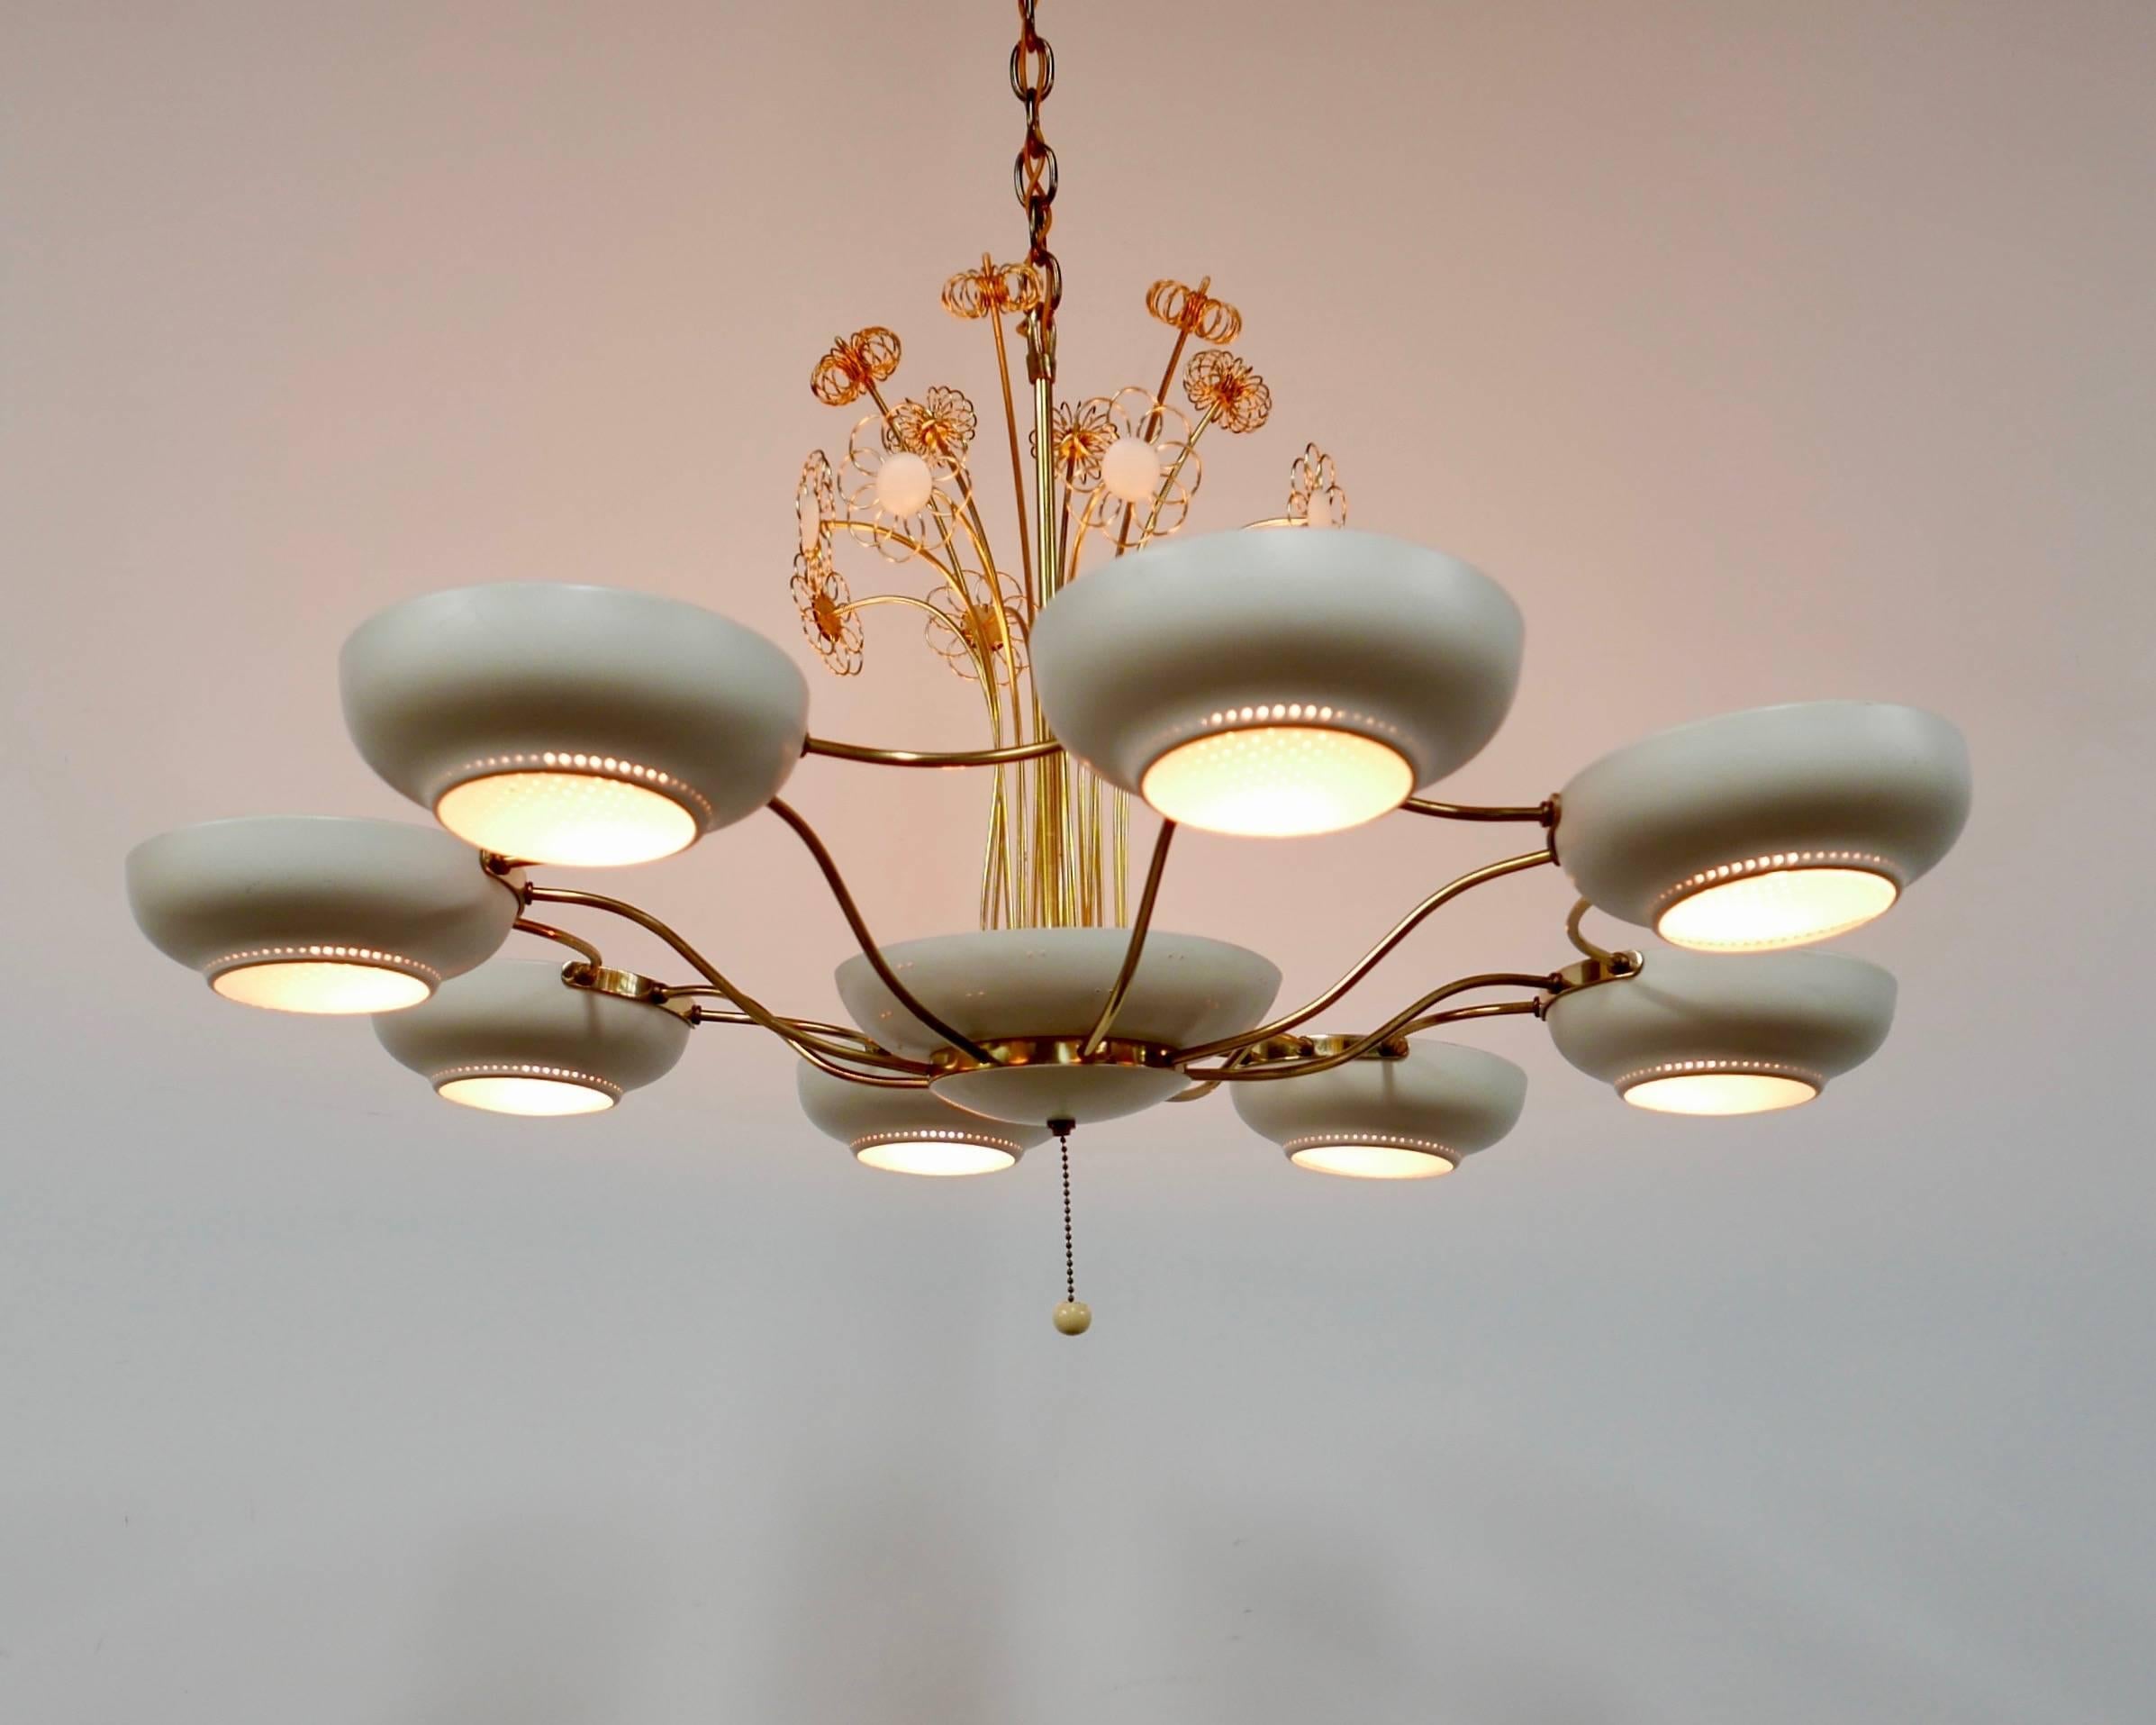 This decorative fixture offers both up and down light to accentuate the floral motif.